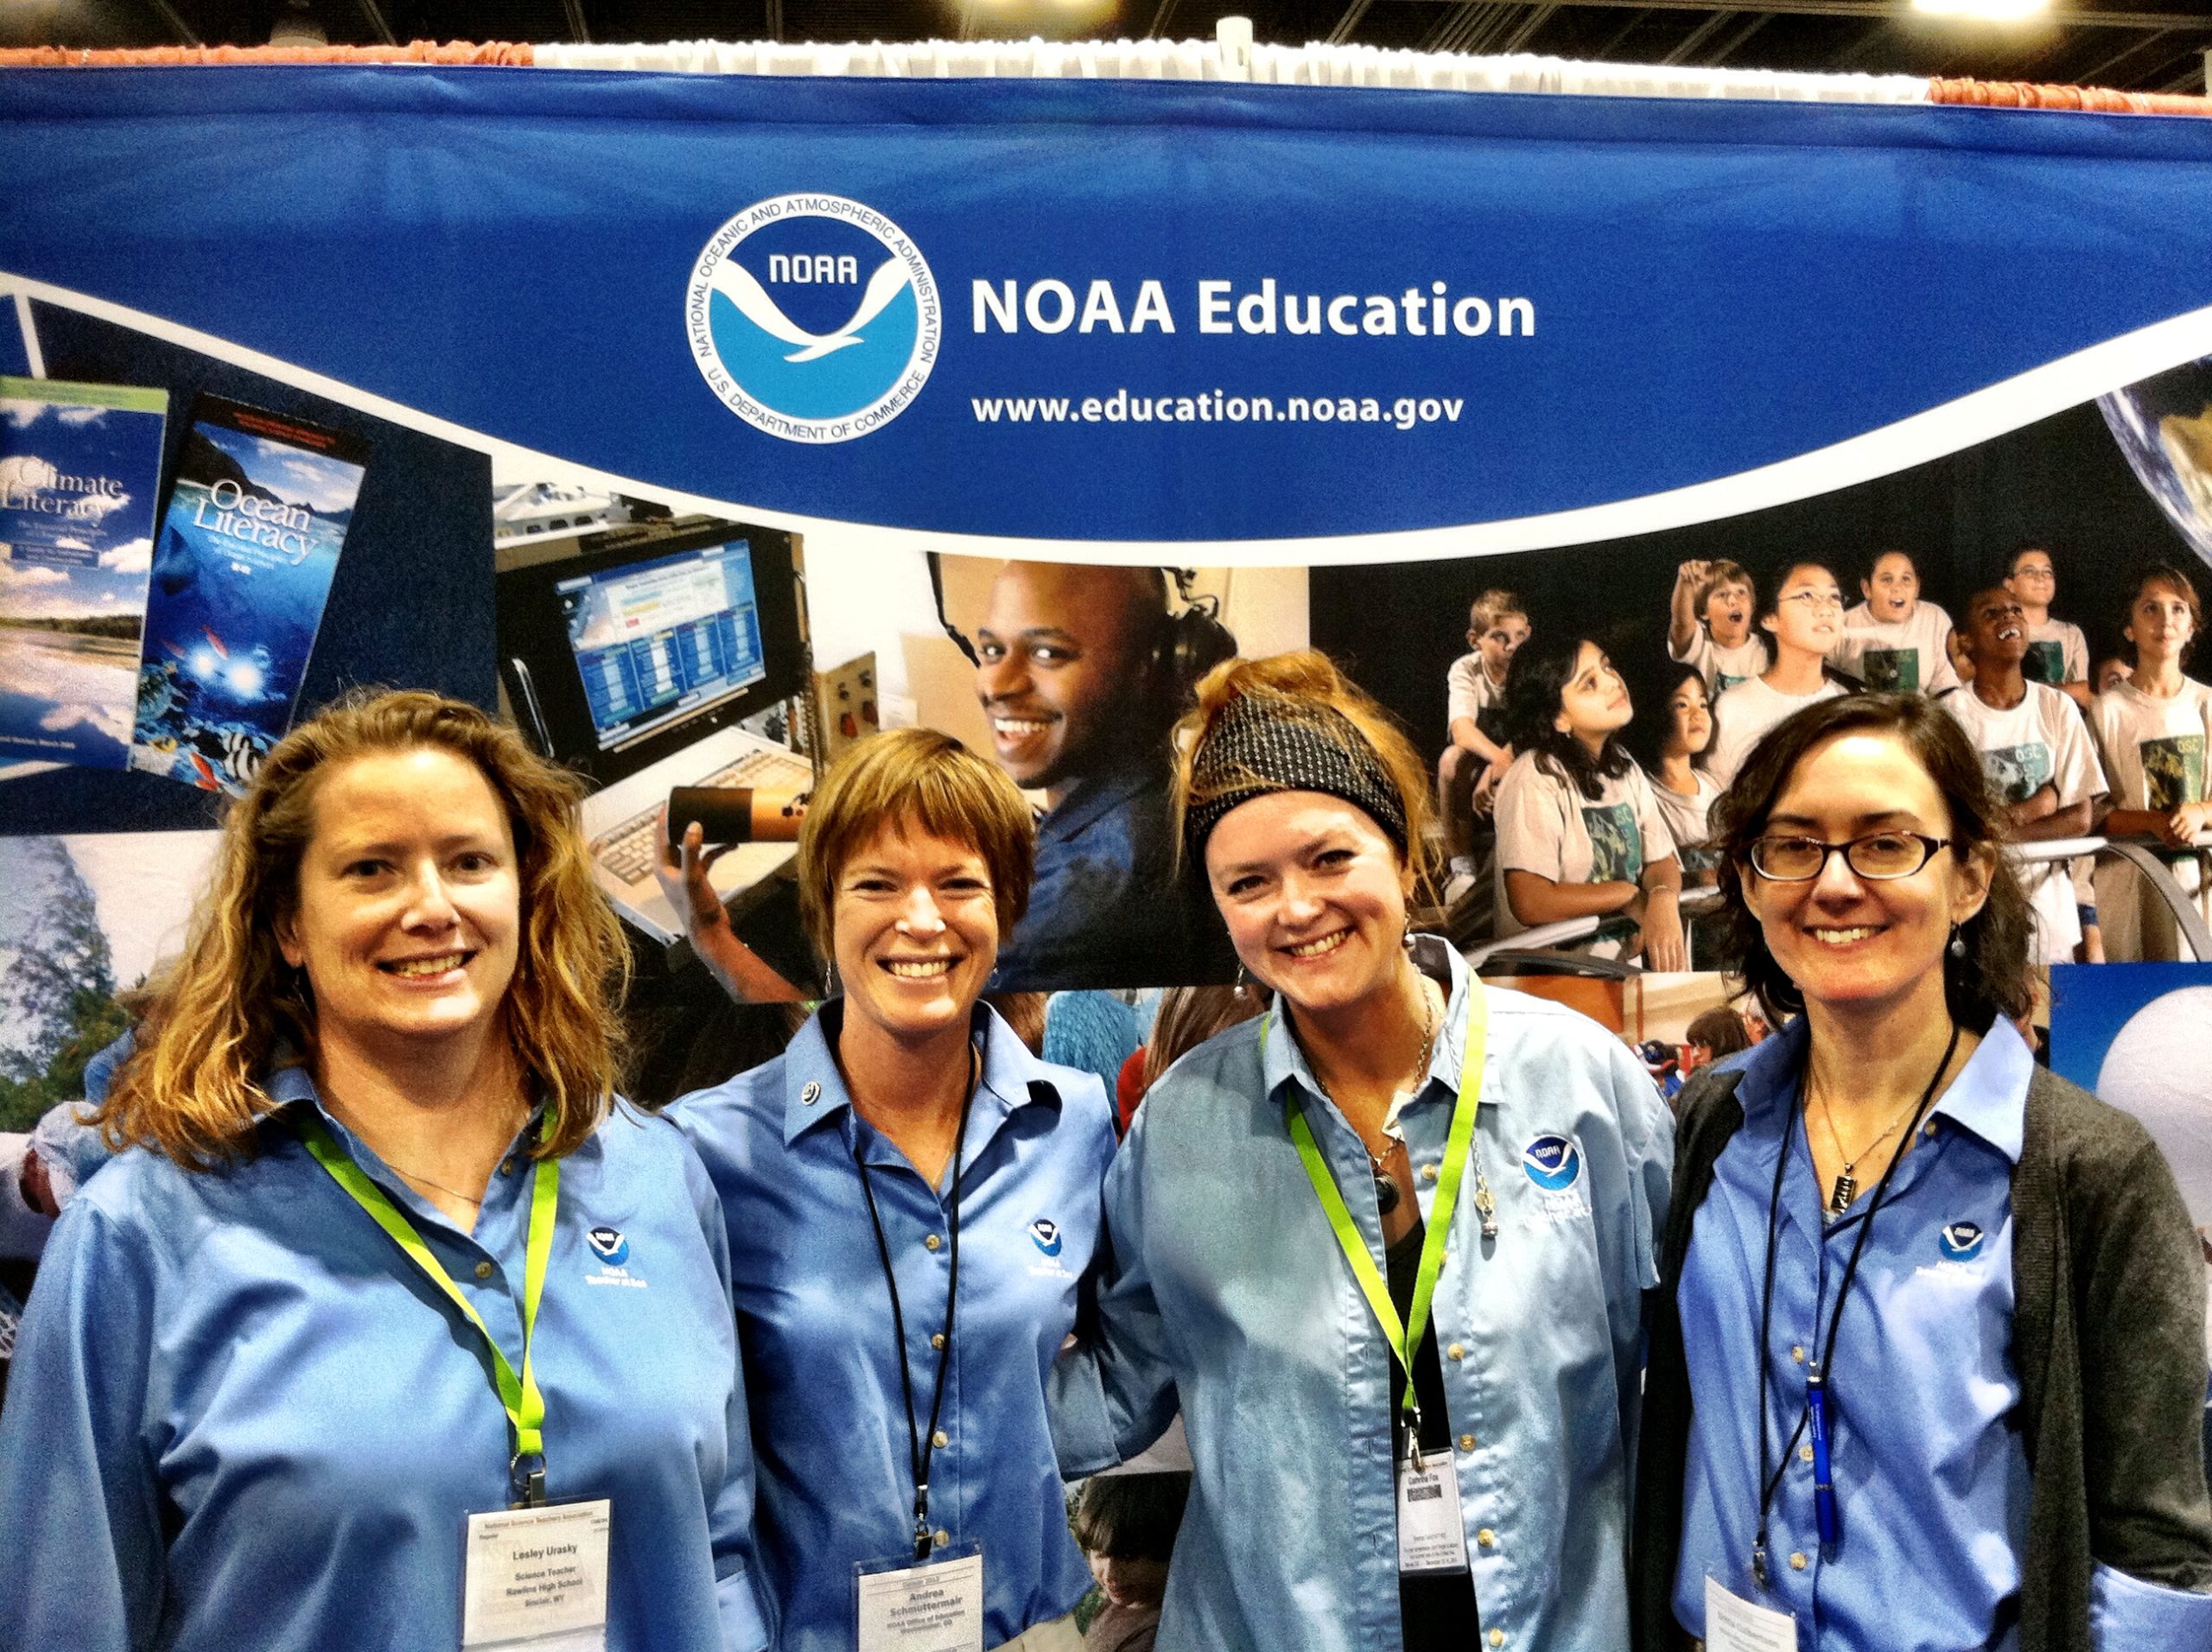 Four women stand in front of a NOAA Education sign.